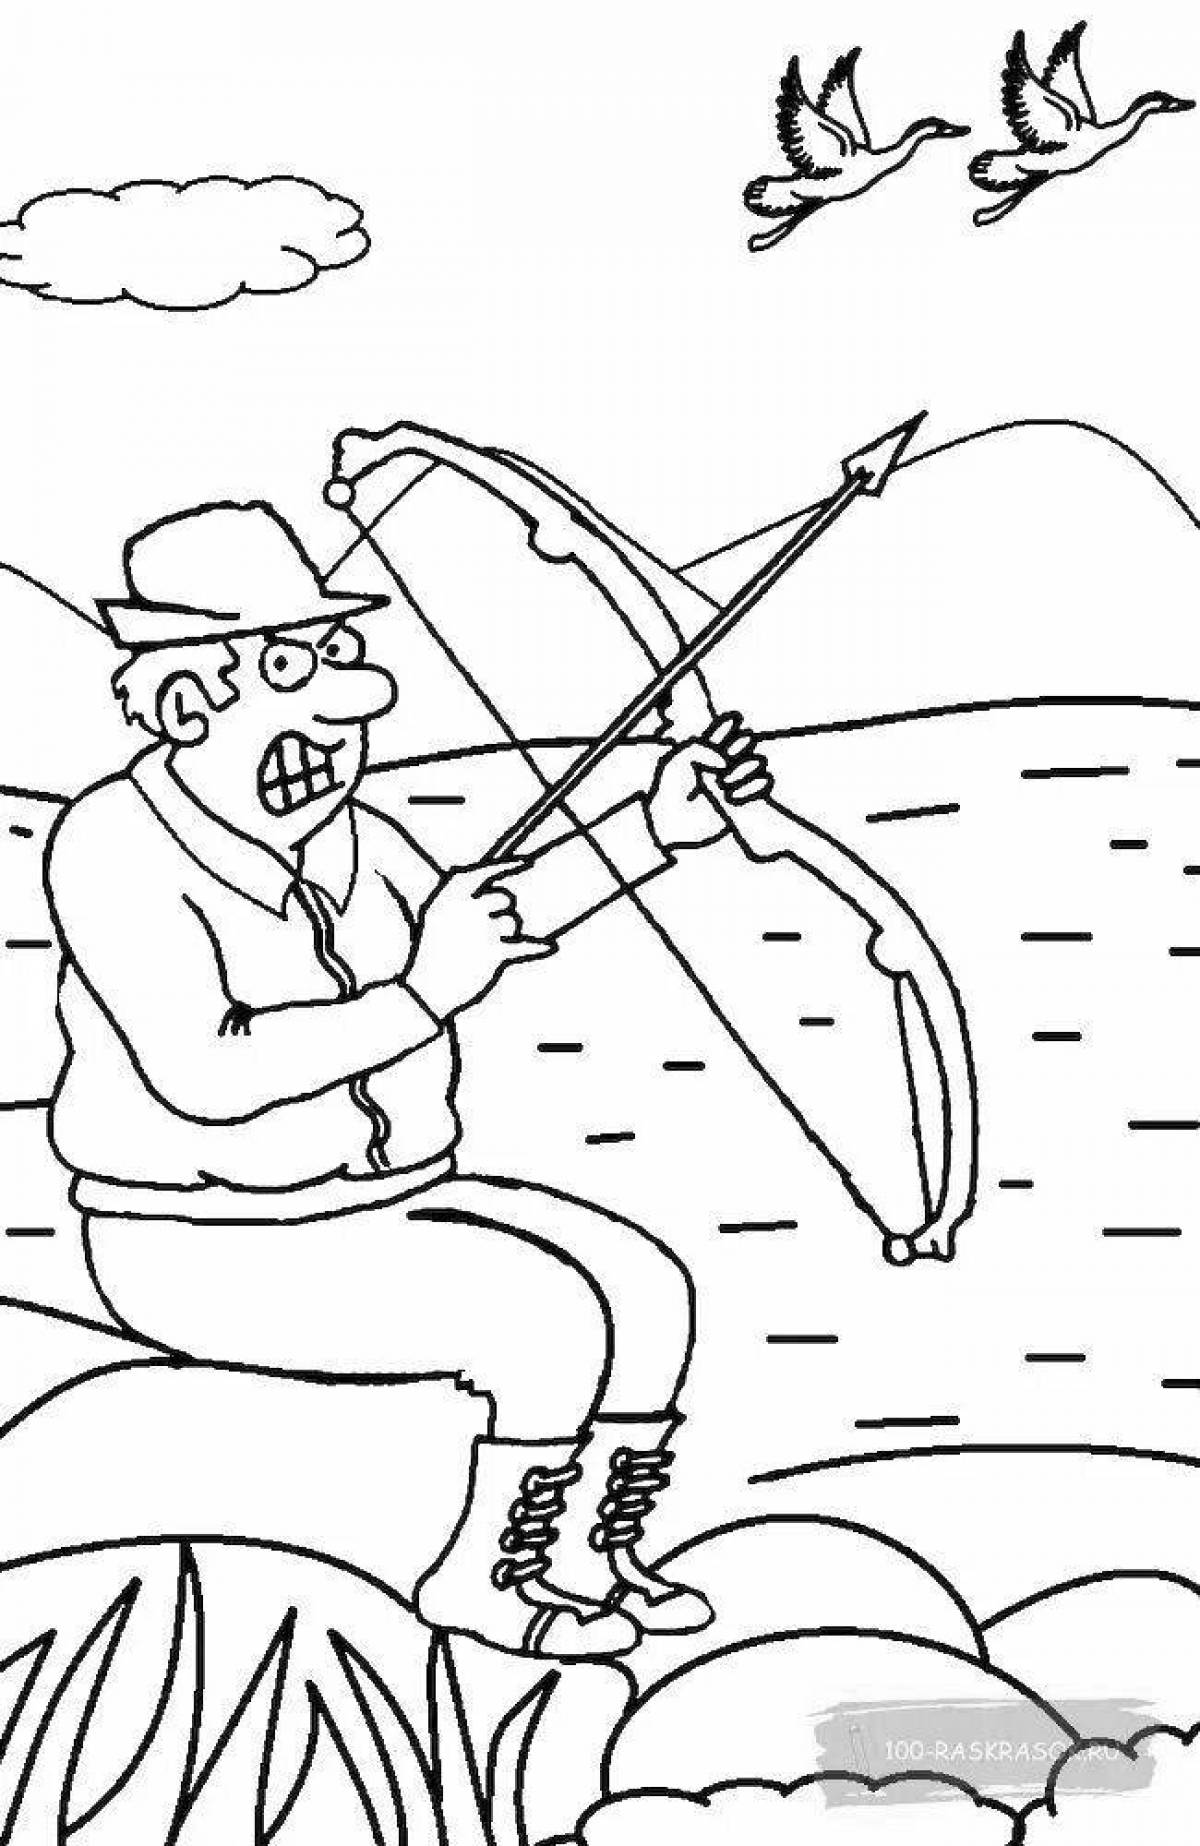 Valorous hunter coloring page